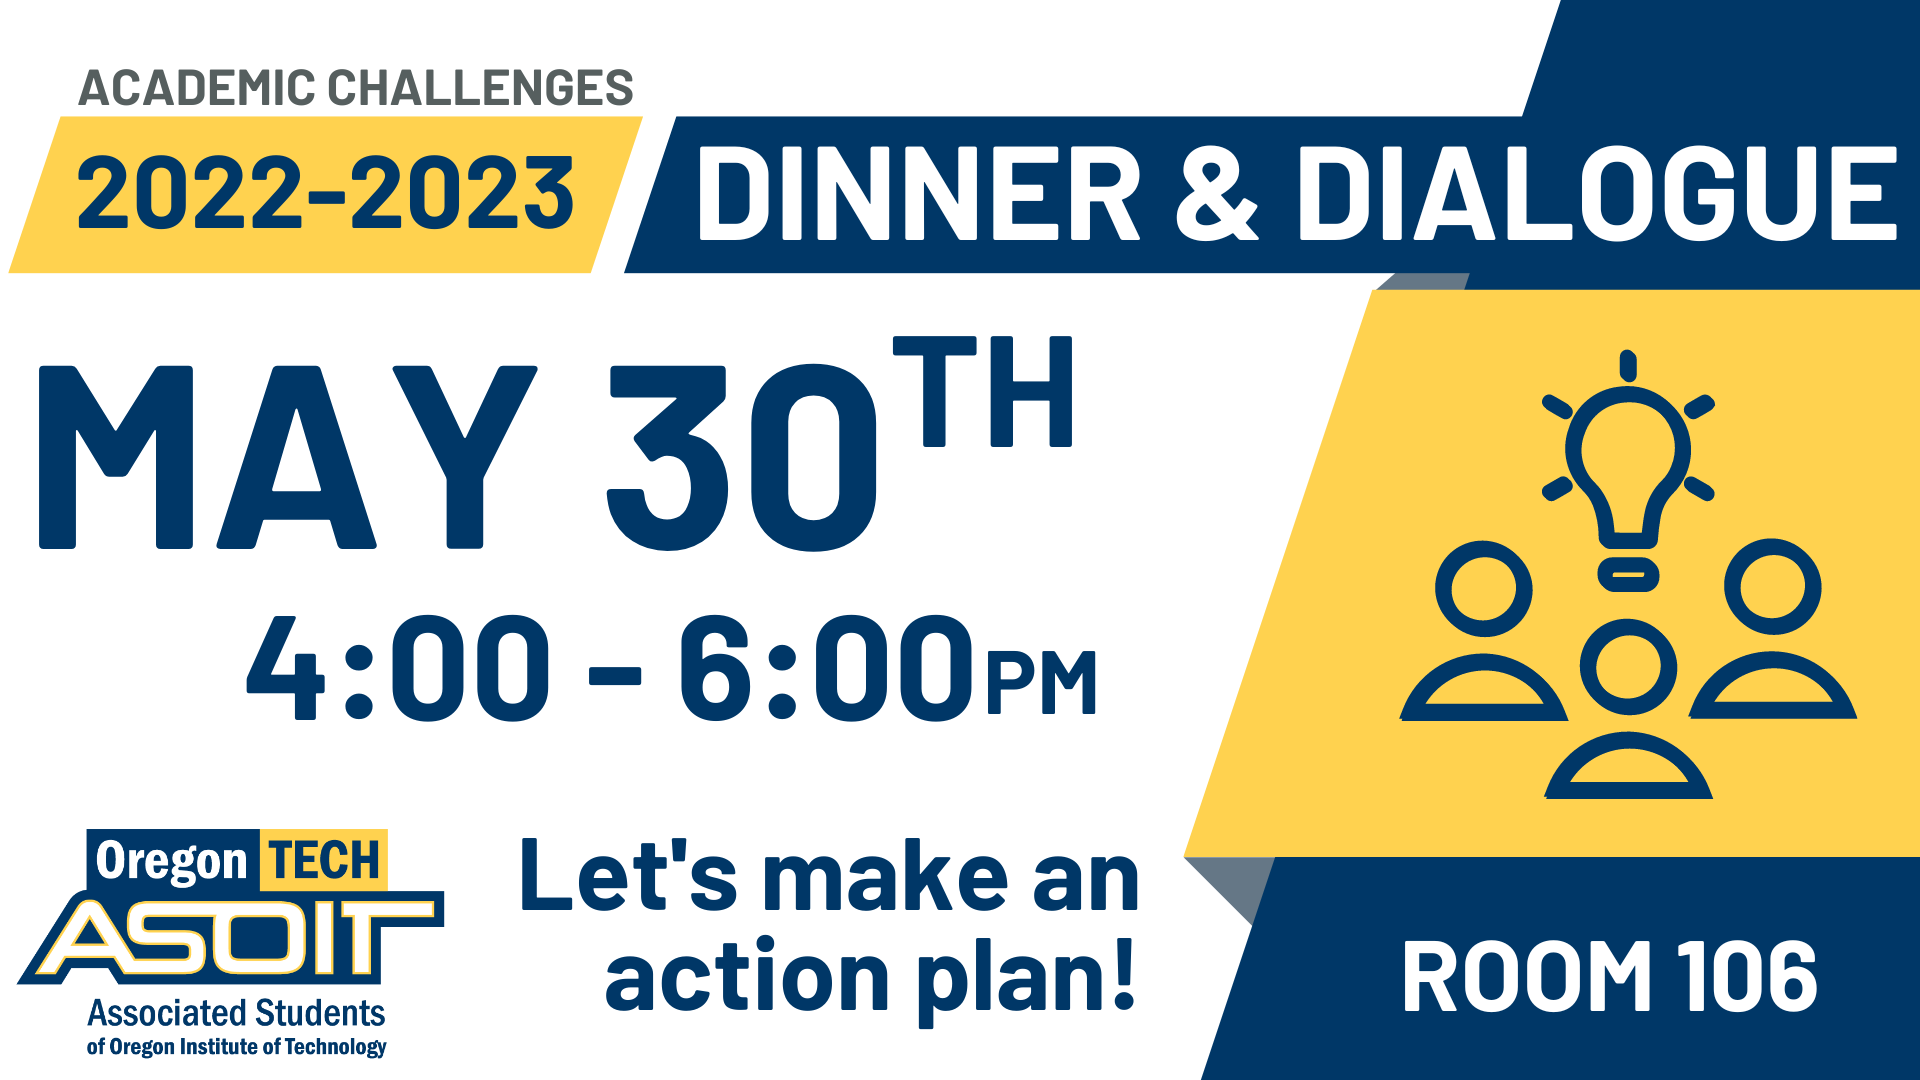 ASOIT PM Dinner & Dialogue Event to determine action steps based on learning from 2022-2023.